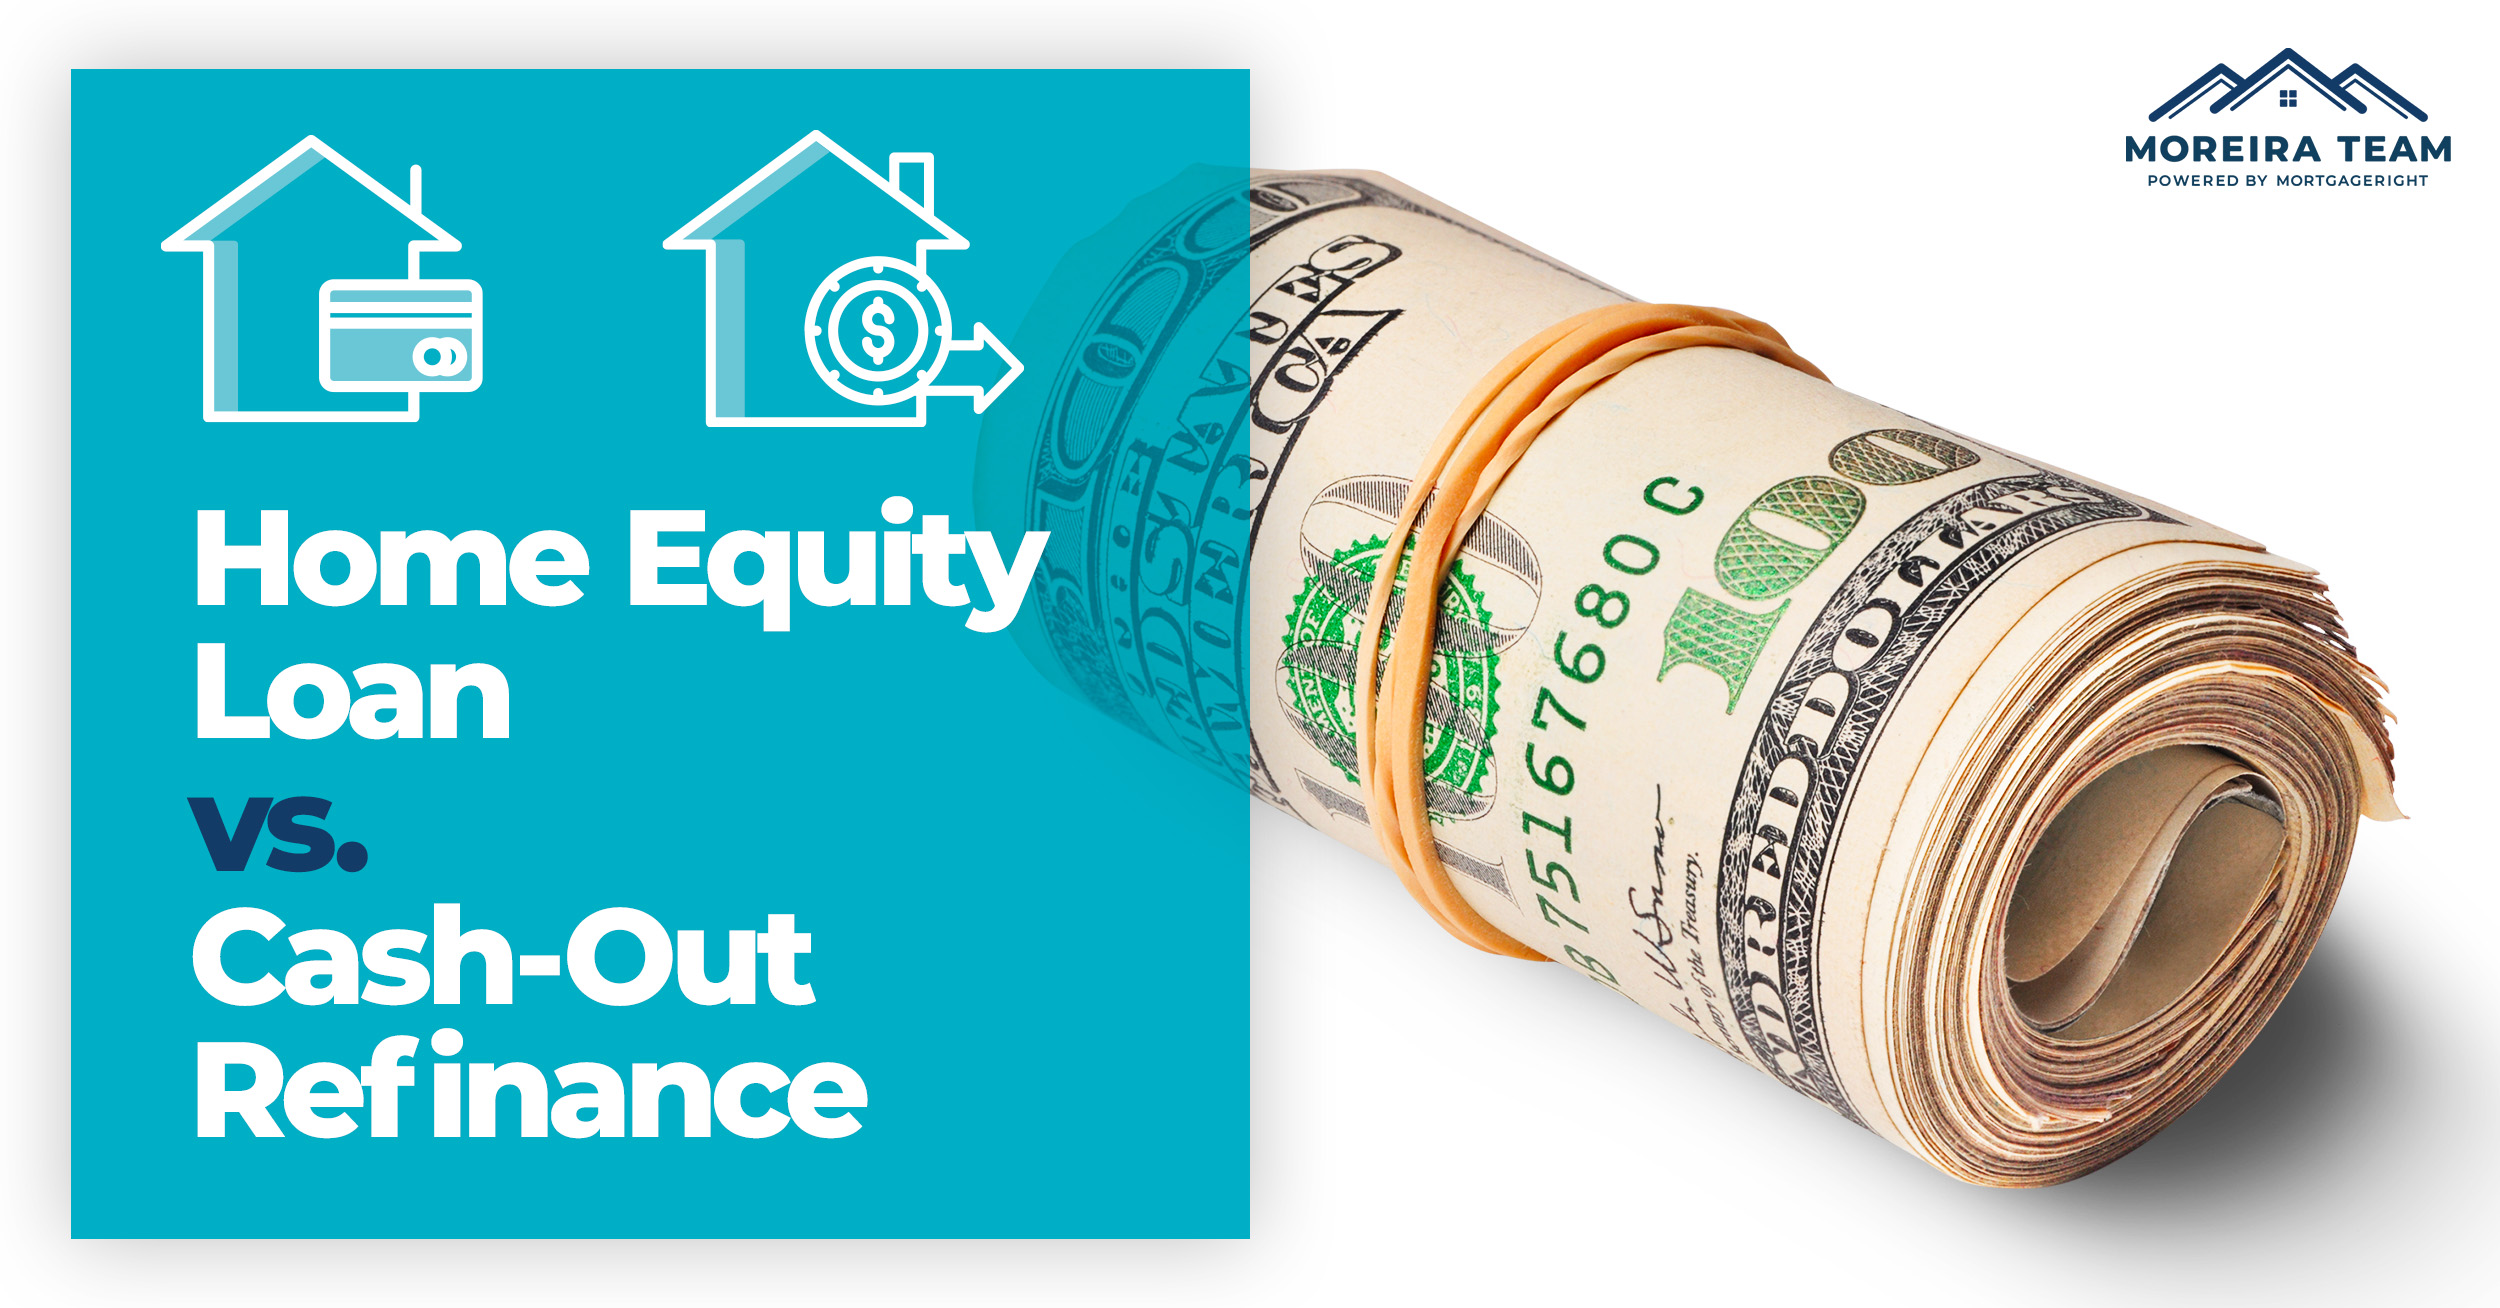 Home Equity Loan vs. Cash-Out Refinance: How to Choose Which One to Tap Your Home’s Value